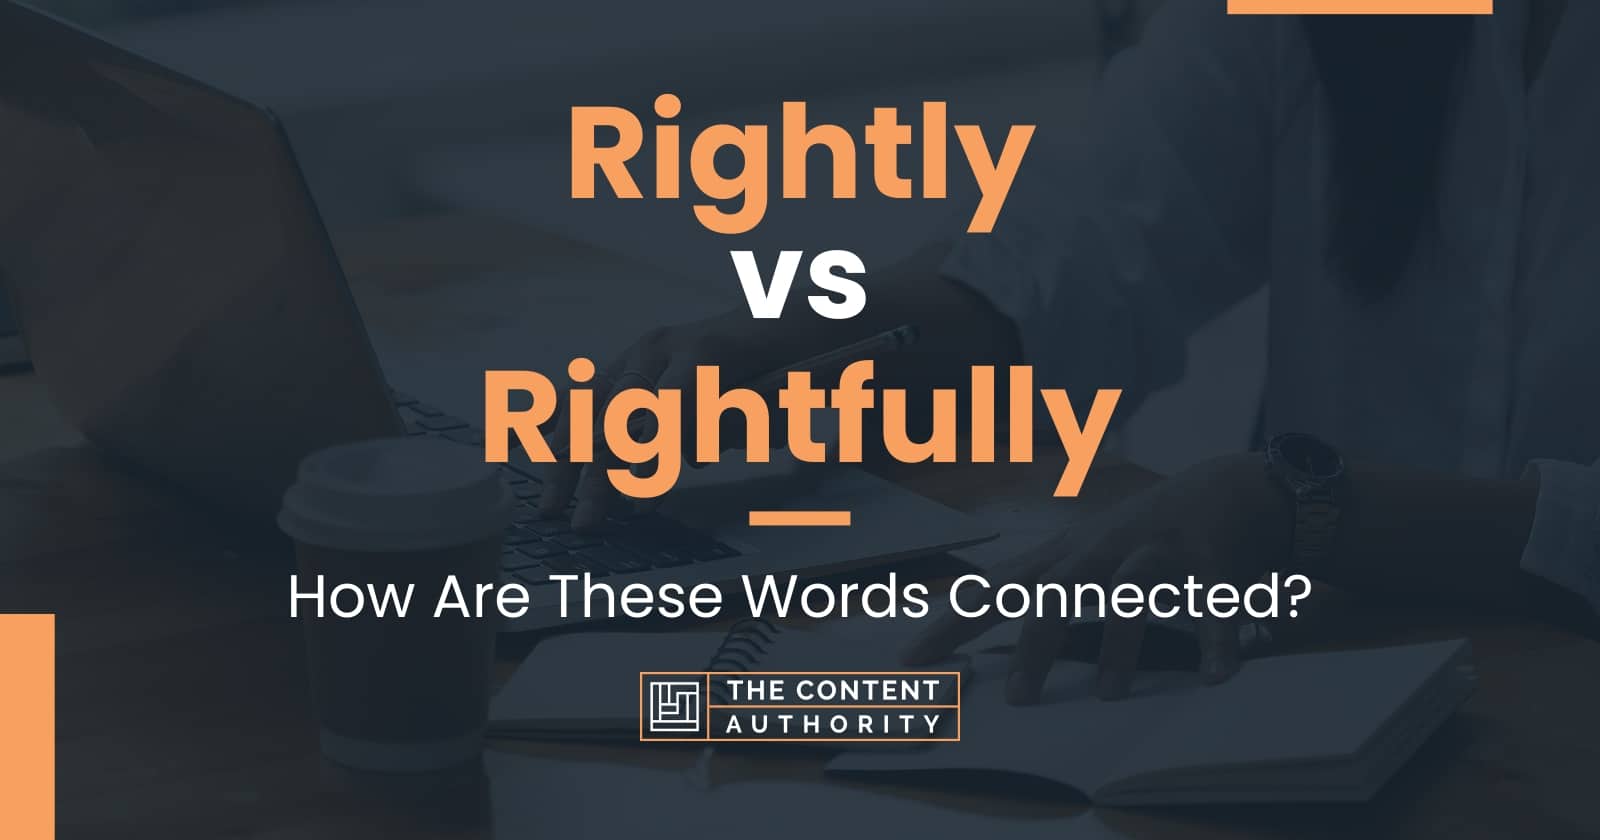 Rightly vs Rightfully: How Are These Words Connected?